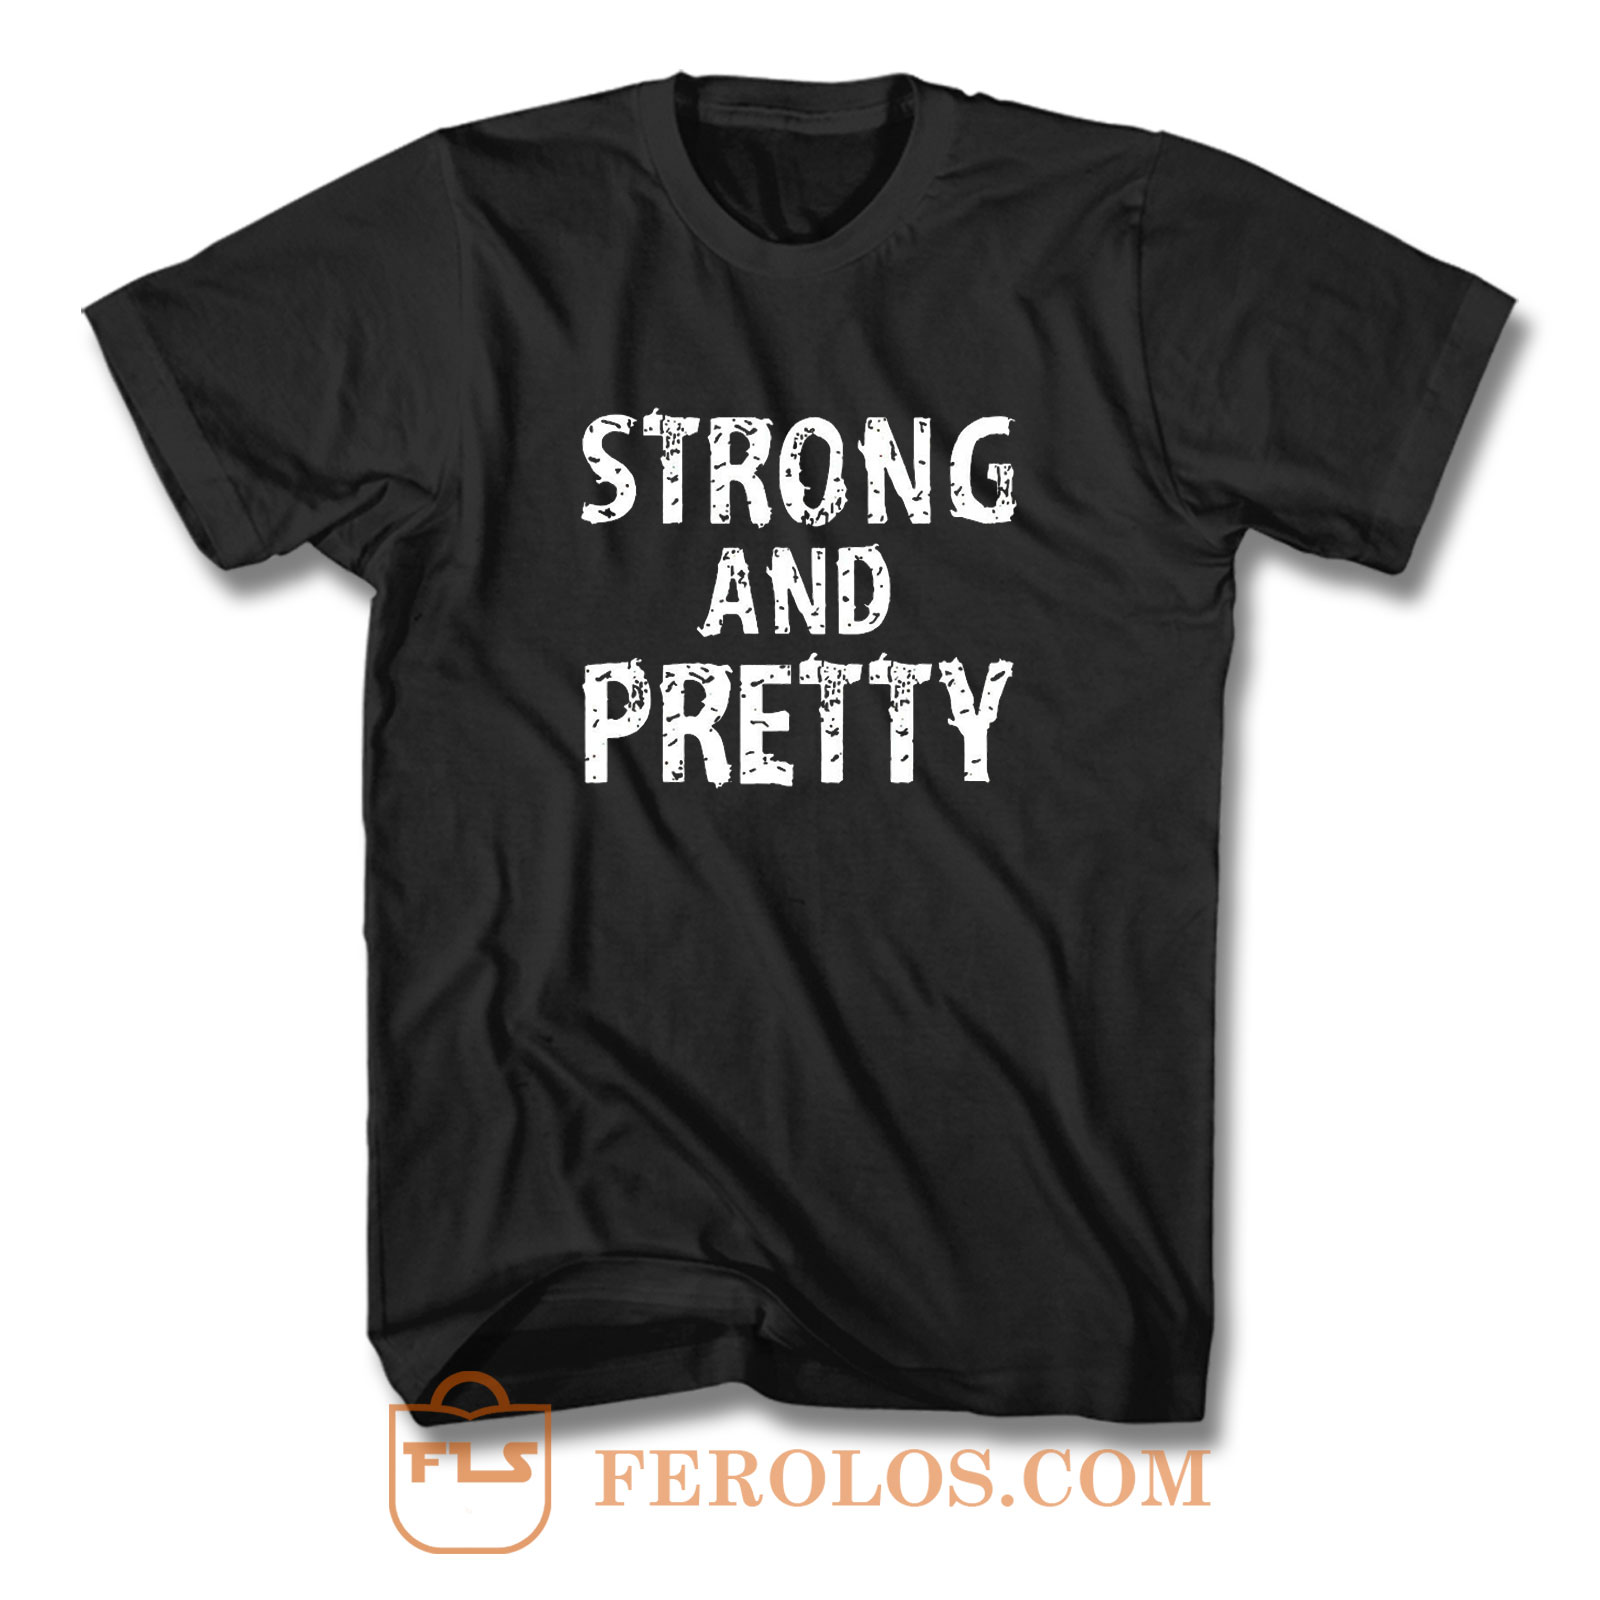 Strong And Pretty Funny Strongman Workout Gym T Shirt | FEROLOS.COM